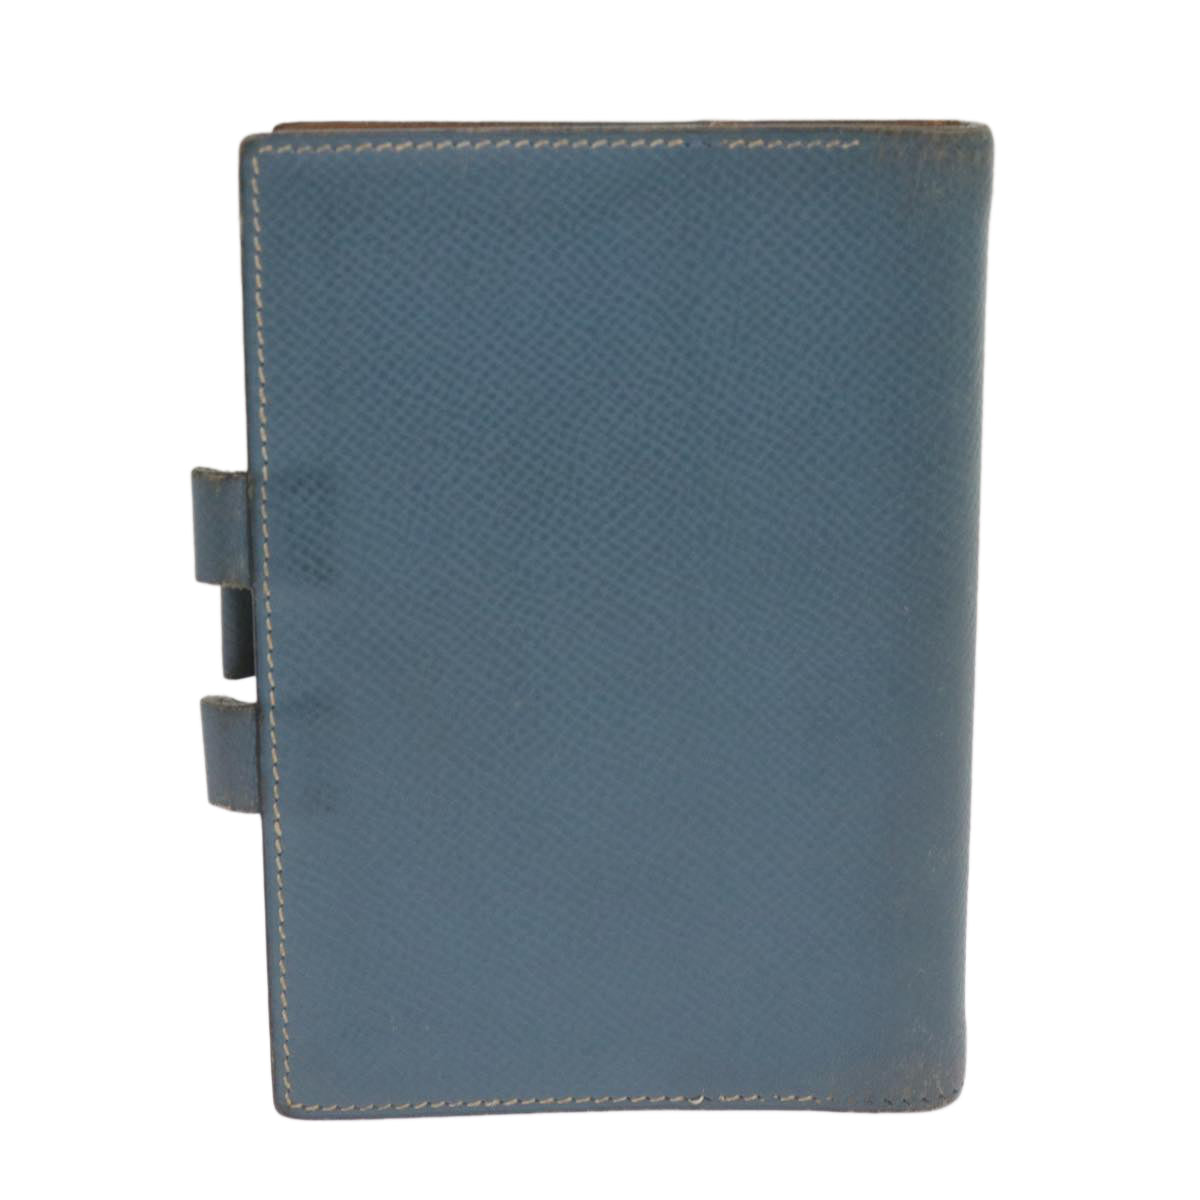 HERMES Agenda GM Day Planner Cover Leather Blue Auth am5960 - 0